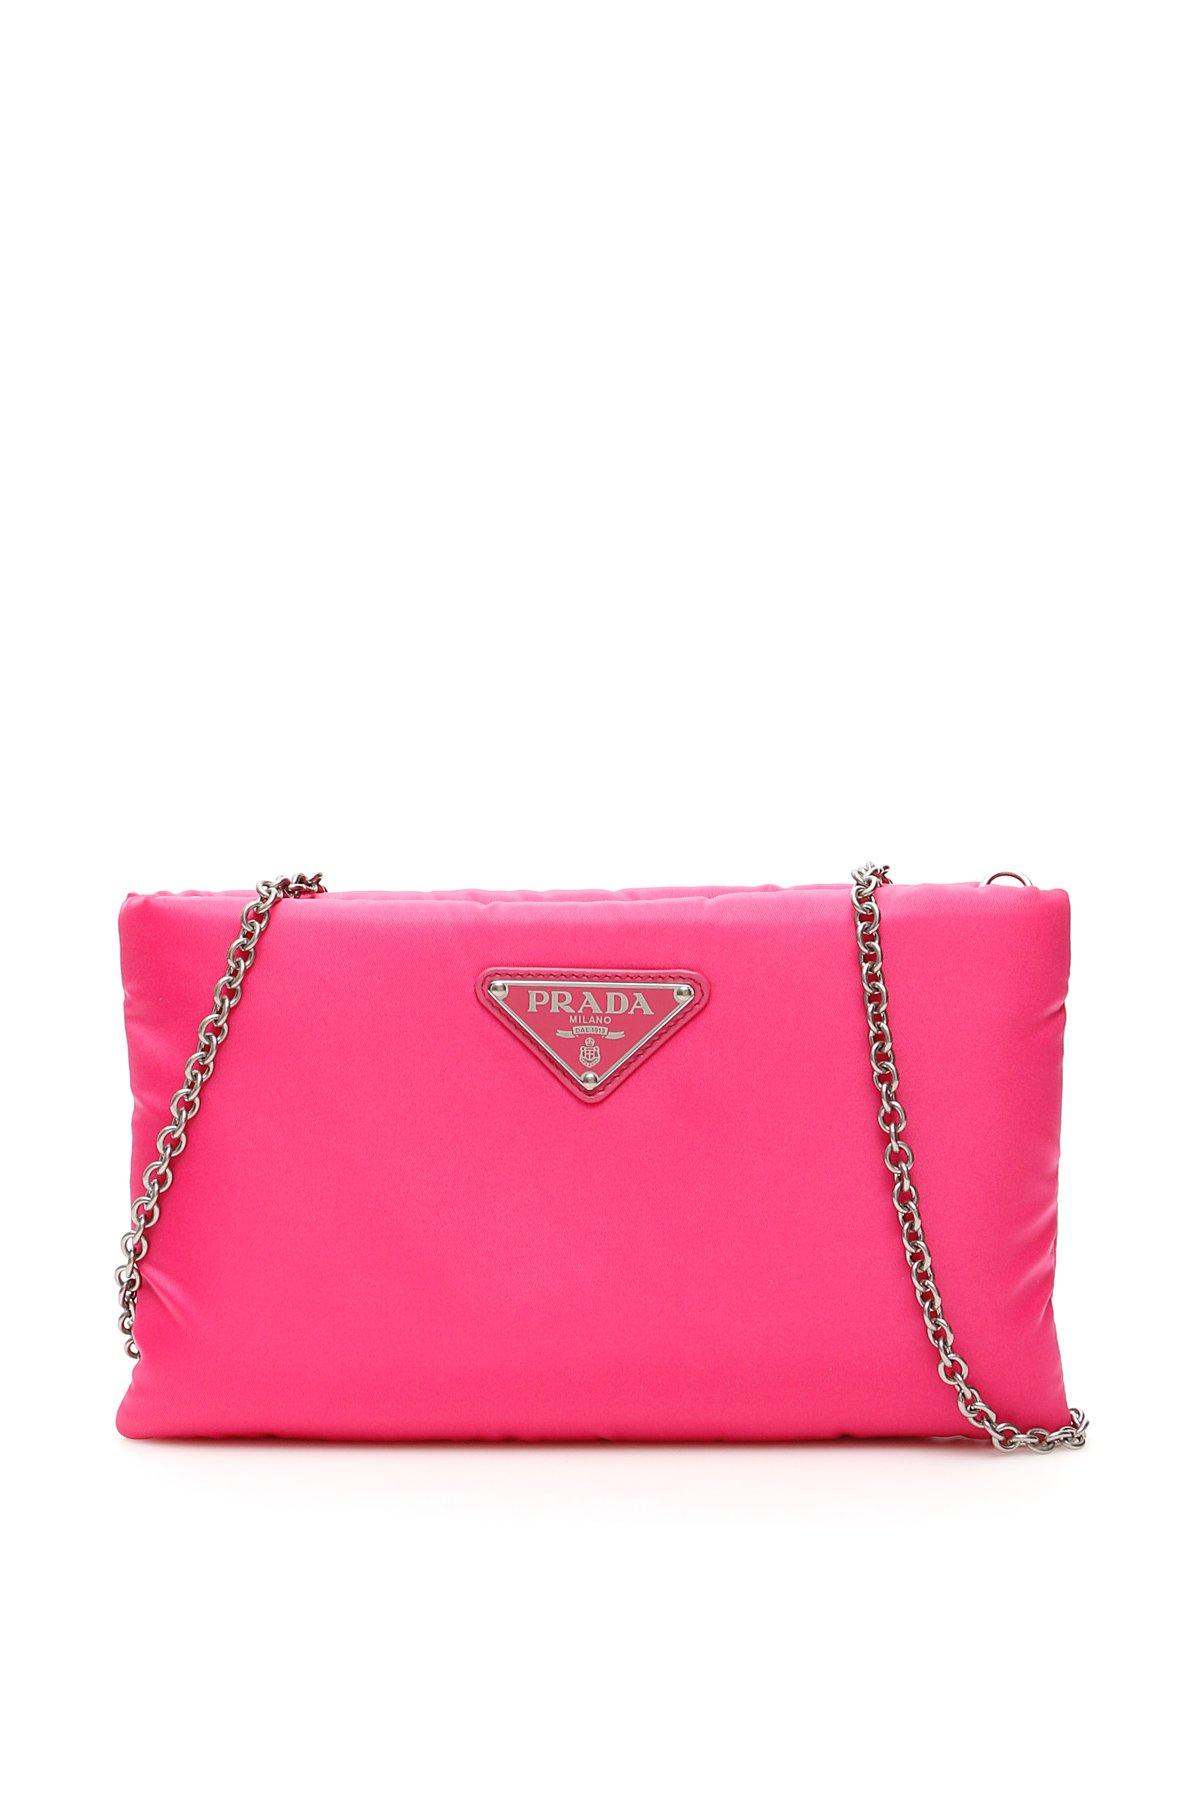 Prada Synthetic Logo Chain Pouch in Pink - Lyst